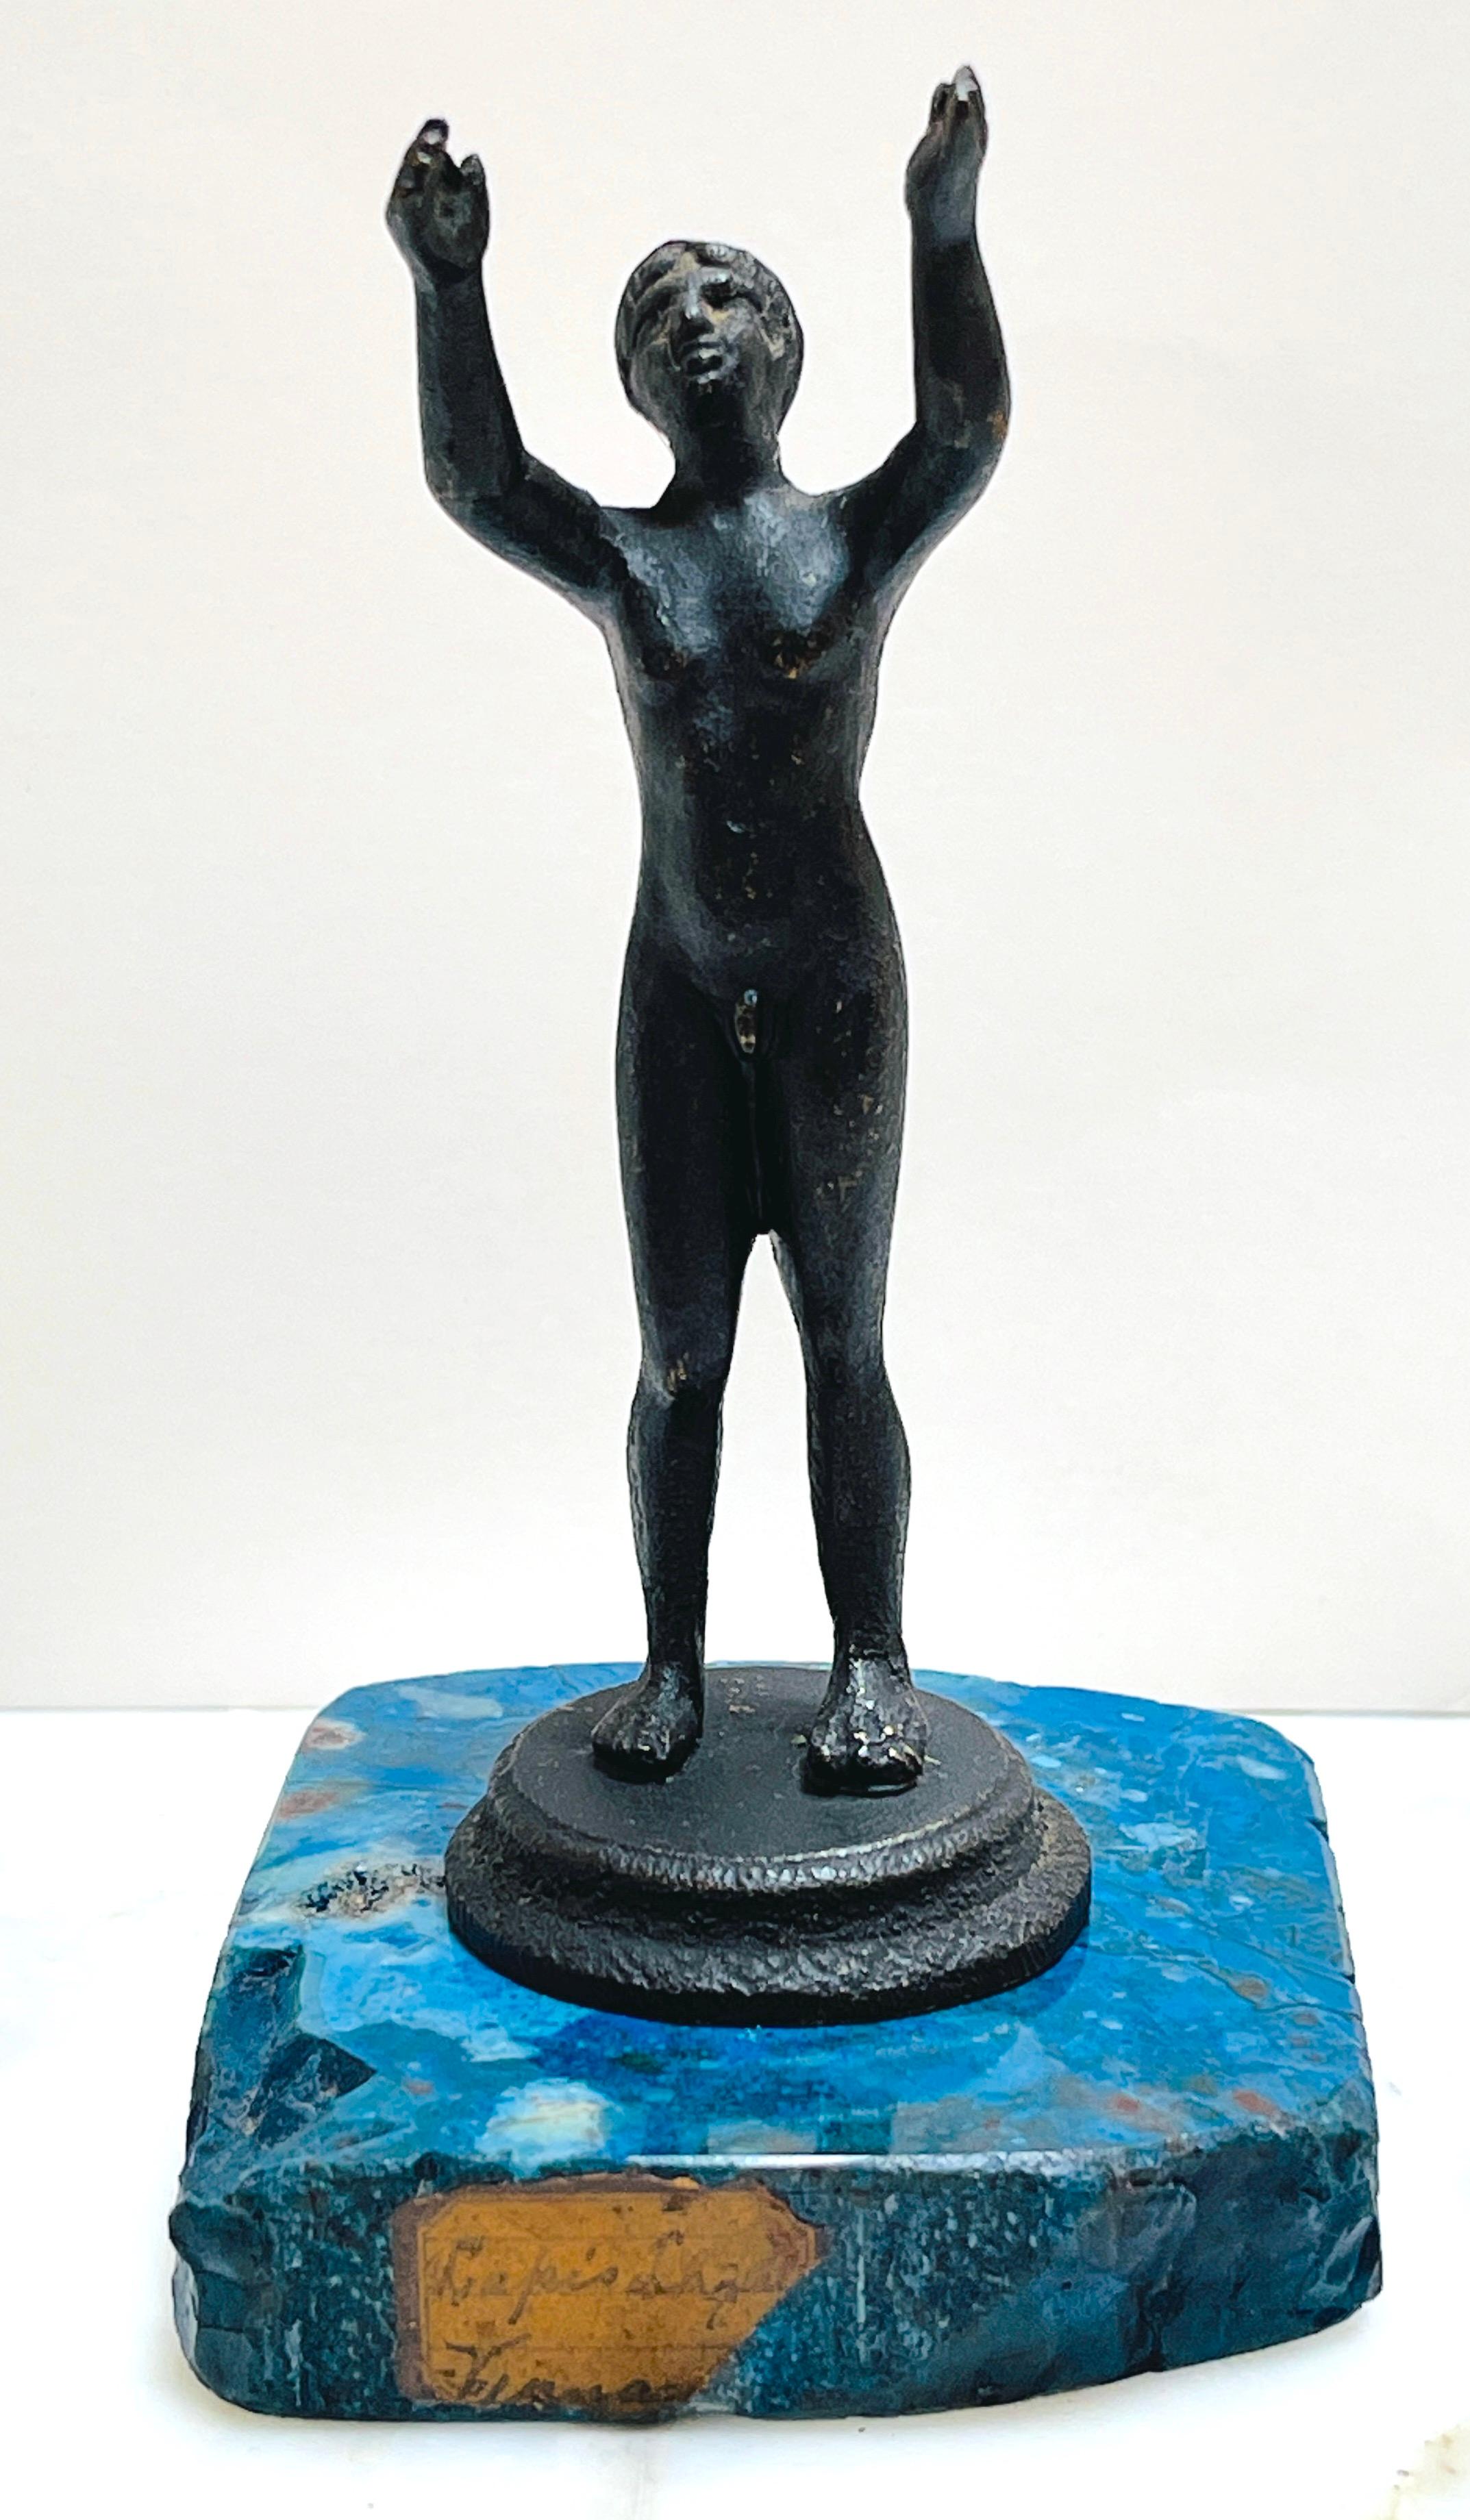 19th century Italian Diminutive Grand Tour Bronze Nude Athlete on Lapis -Lazuli Base
Italy, Attributed Naples Foundry, circa 1875
This 19th-century Italian bronze sculpture, attributed to the Naples Foundry, is a remarkable example of Grand Tour